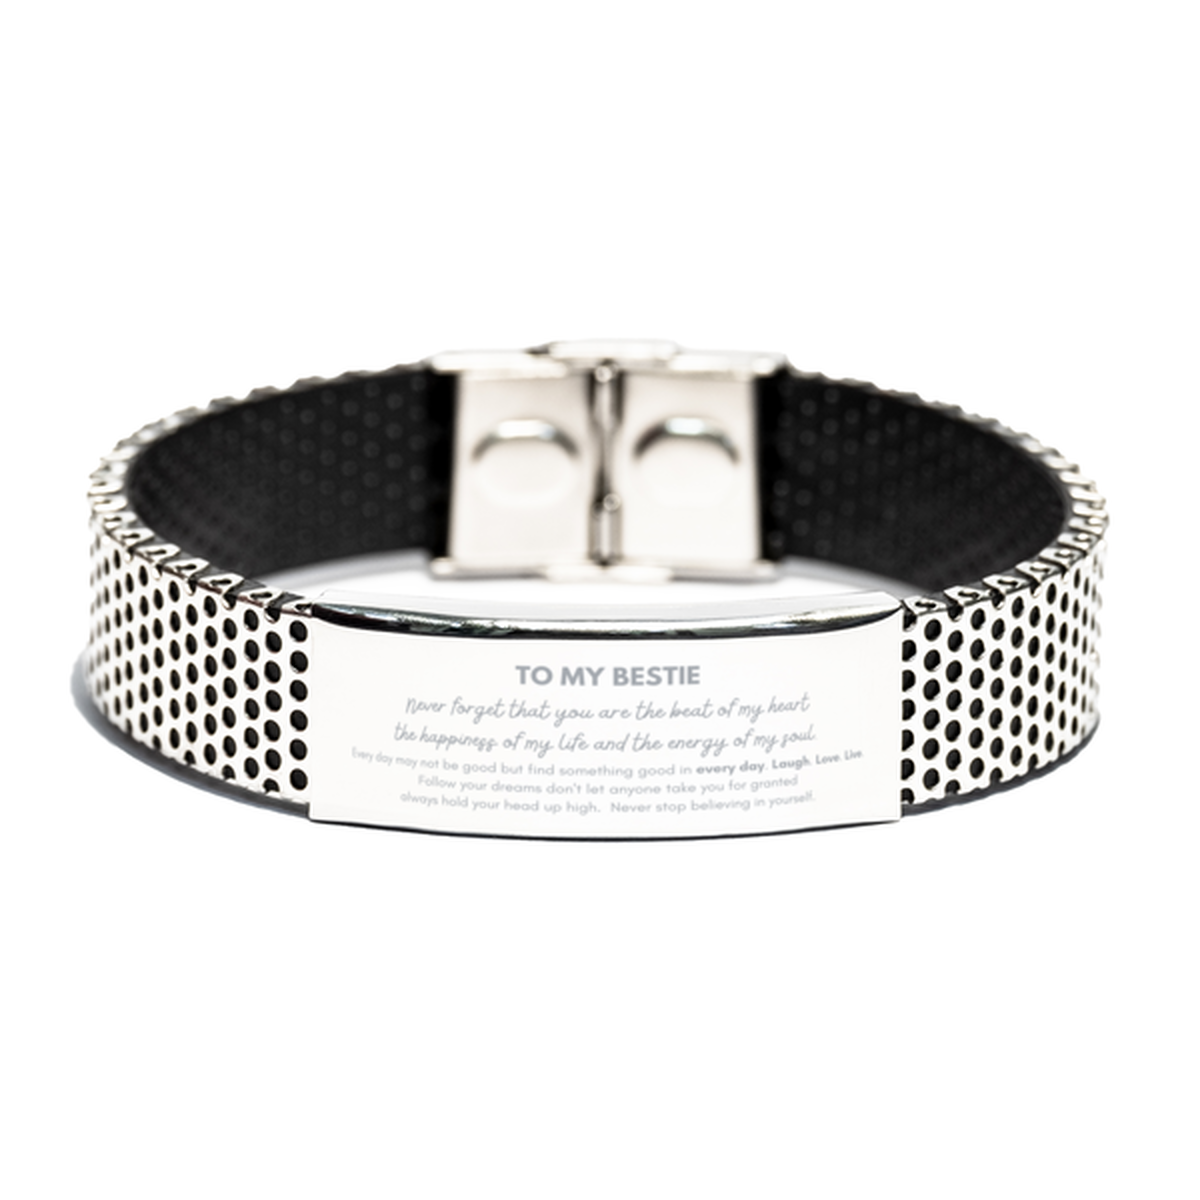 To My Bestie Bracelet Gifts, Christmas Bestie Stainless Steel Bracelet Present, Birthday Unique Motivational For Bestie, To My Bestie Never forget that you are the beat of my heart the happiness of my life and the energy of my soul